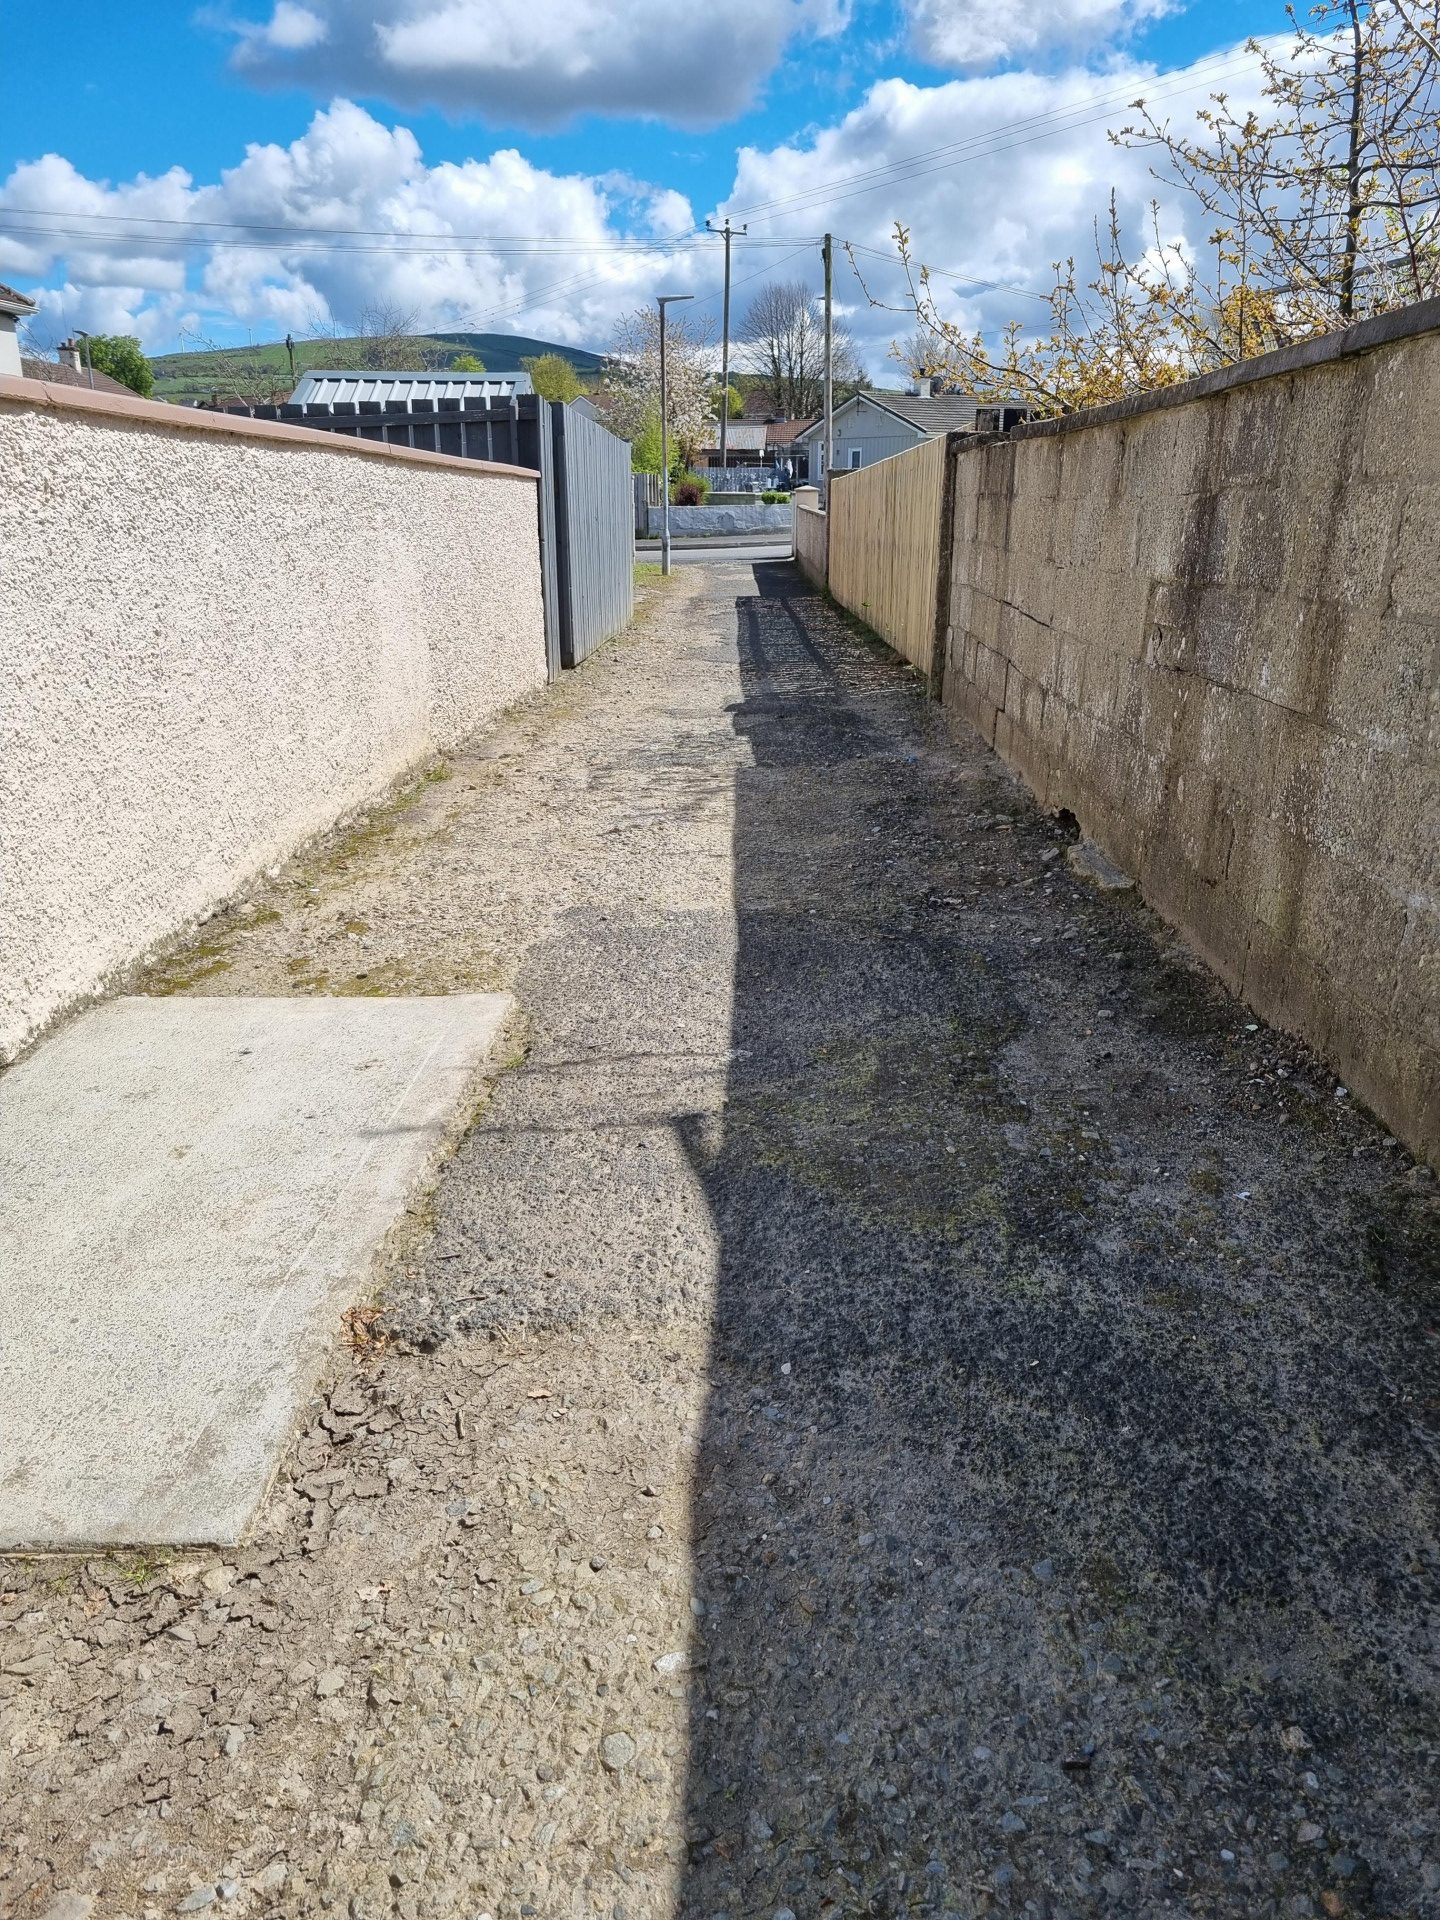 Alleyway to be resurfaced following residents’ pleas